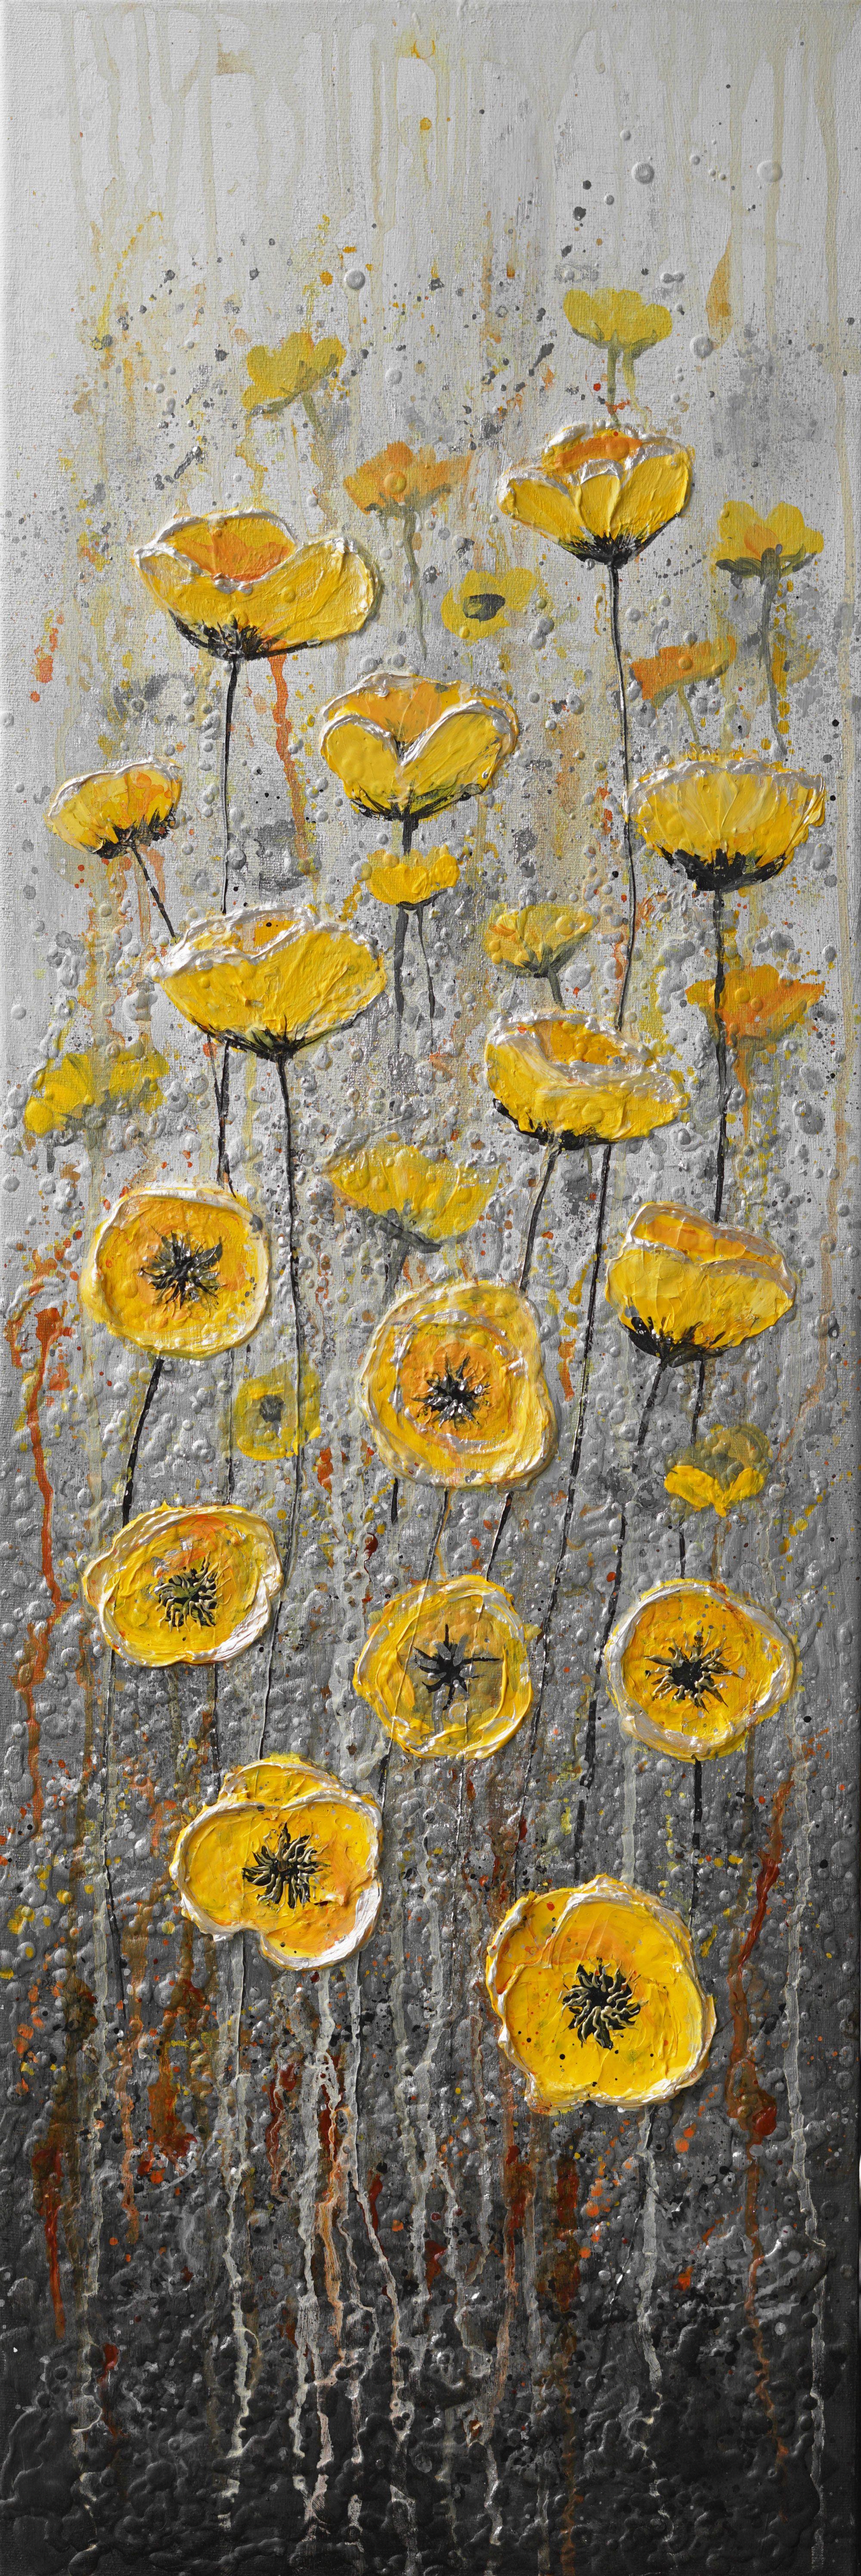 Original yellow poppy flower painting. Expressive textured impasto painting. Painted on canvas and ready to hang from box to wall. Full of thick paint!    SIZE: 12" wide x 36" high x 0.5" depth (91 x 30 x 2cm)    MEDIUM: High-quality professional